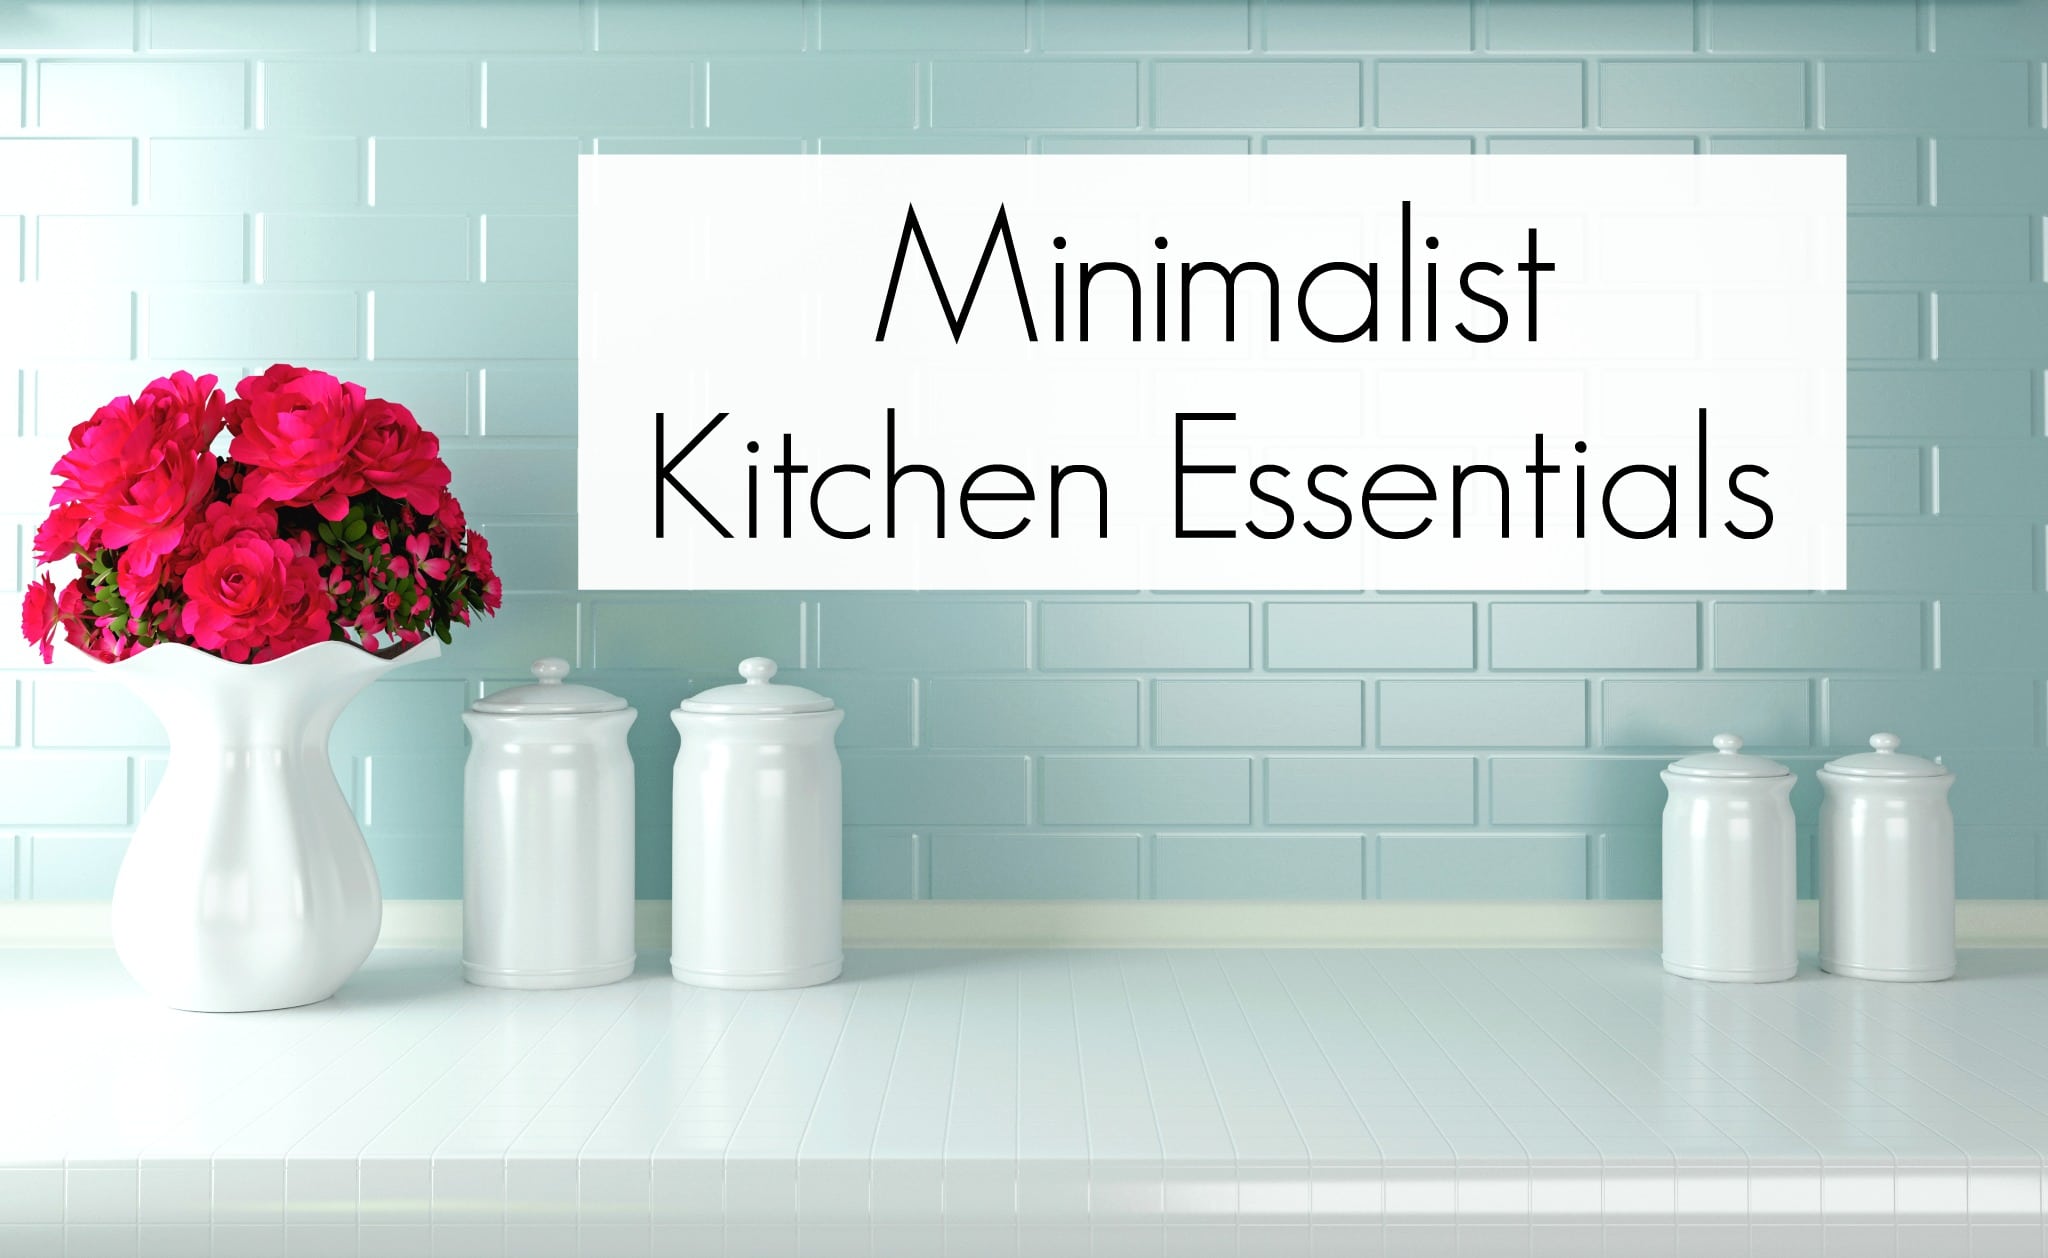 21 Cooking Essentials for a Minimalist Home Cook 